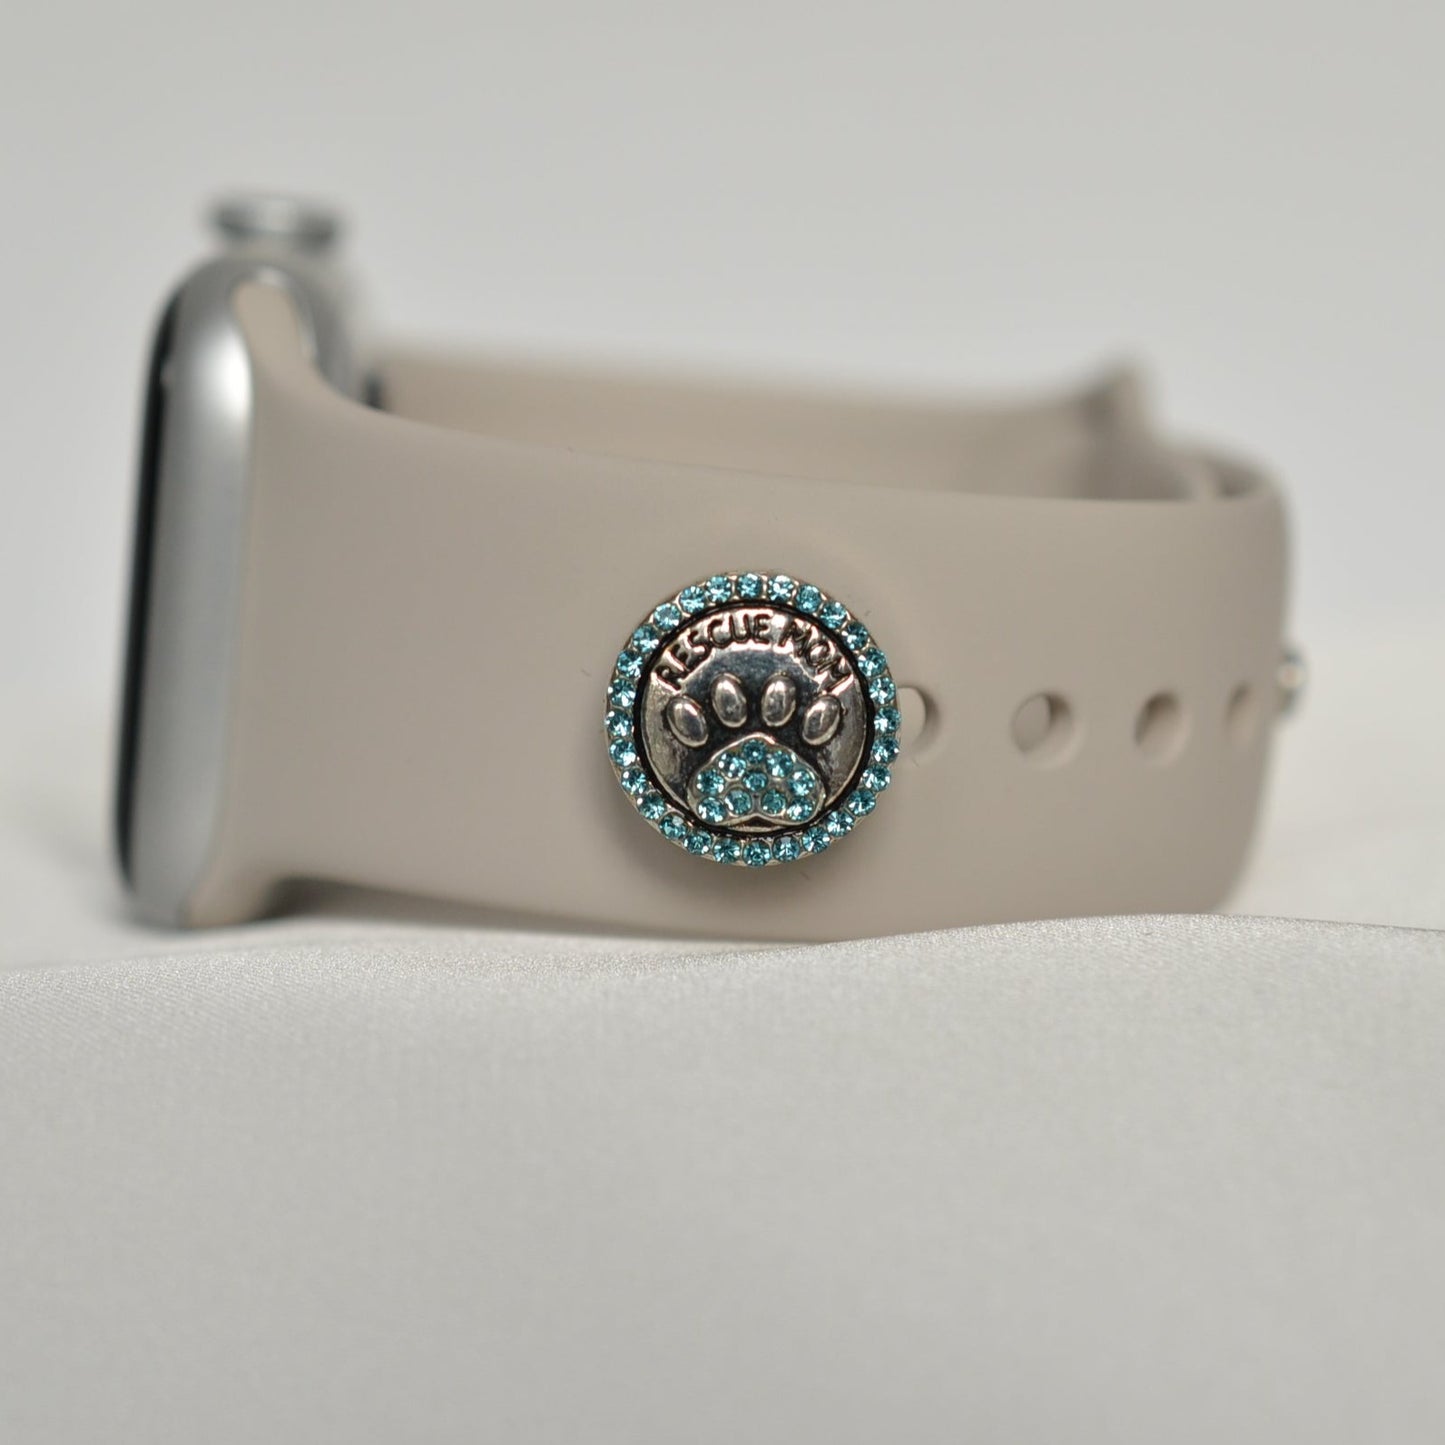 Blue Rescue Mom Charm for Belts, Bags and Watch Bands